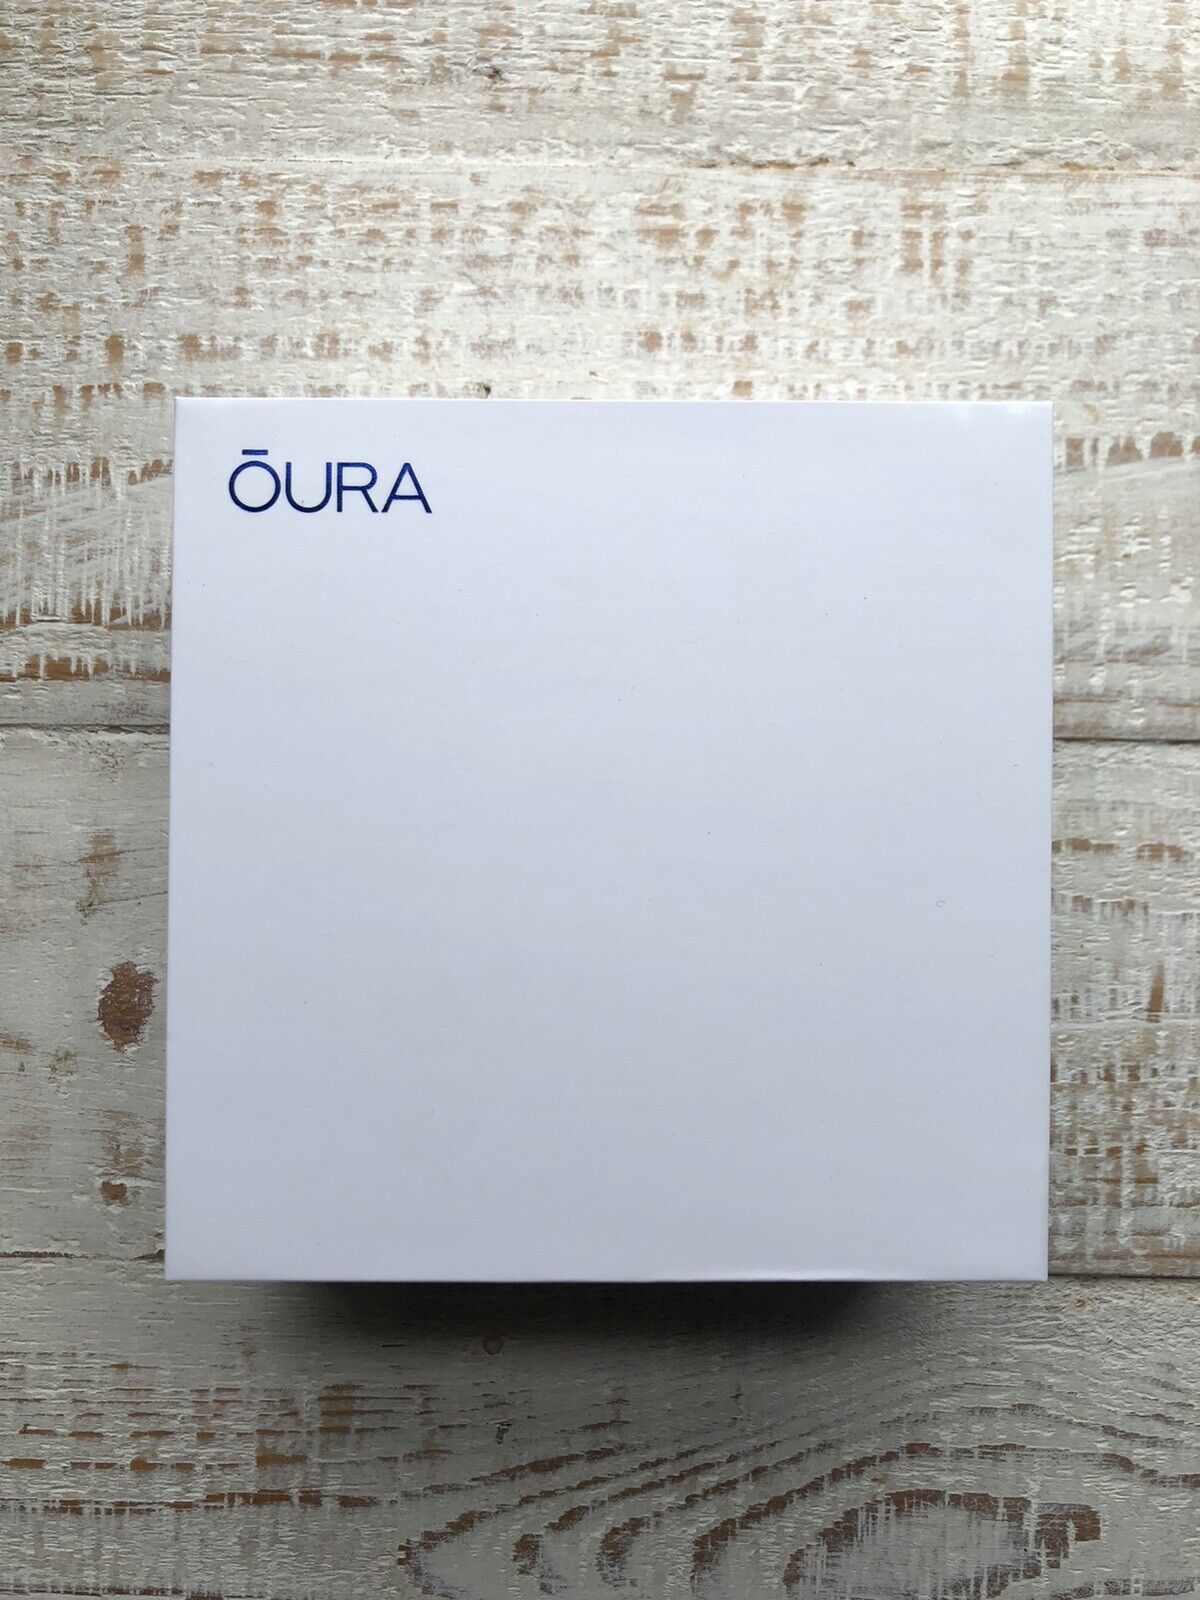 Oura Ring Gen 3 Tracker (Color SILVER) New in Box • Size 8